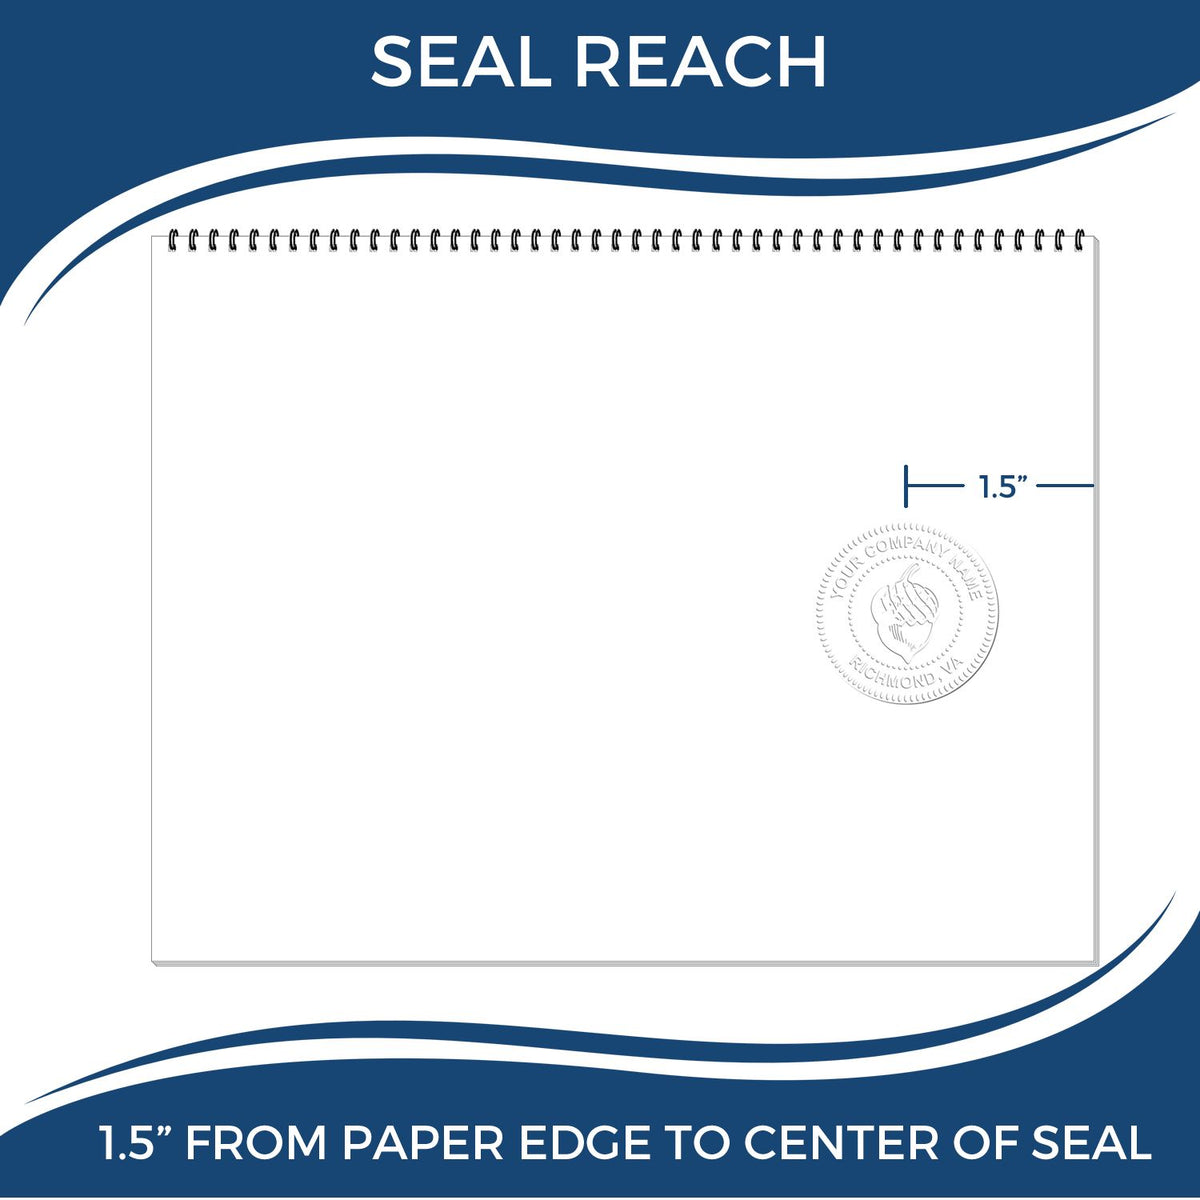 An infographic showing the seal reach which is represented by a ruler and a miniature seal image of the Hybrid Michigan Landscape Architect Seal